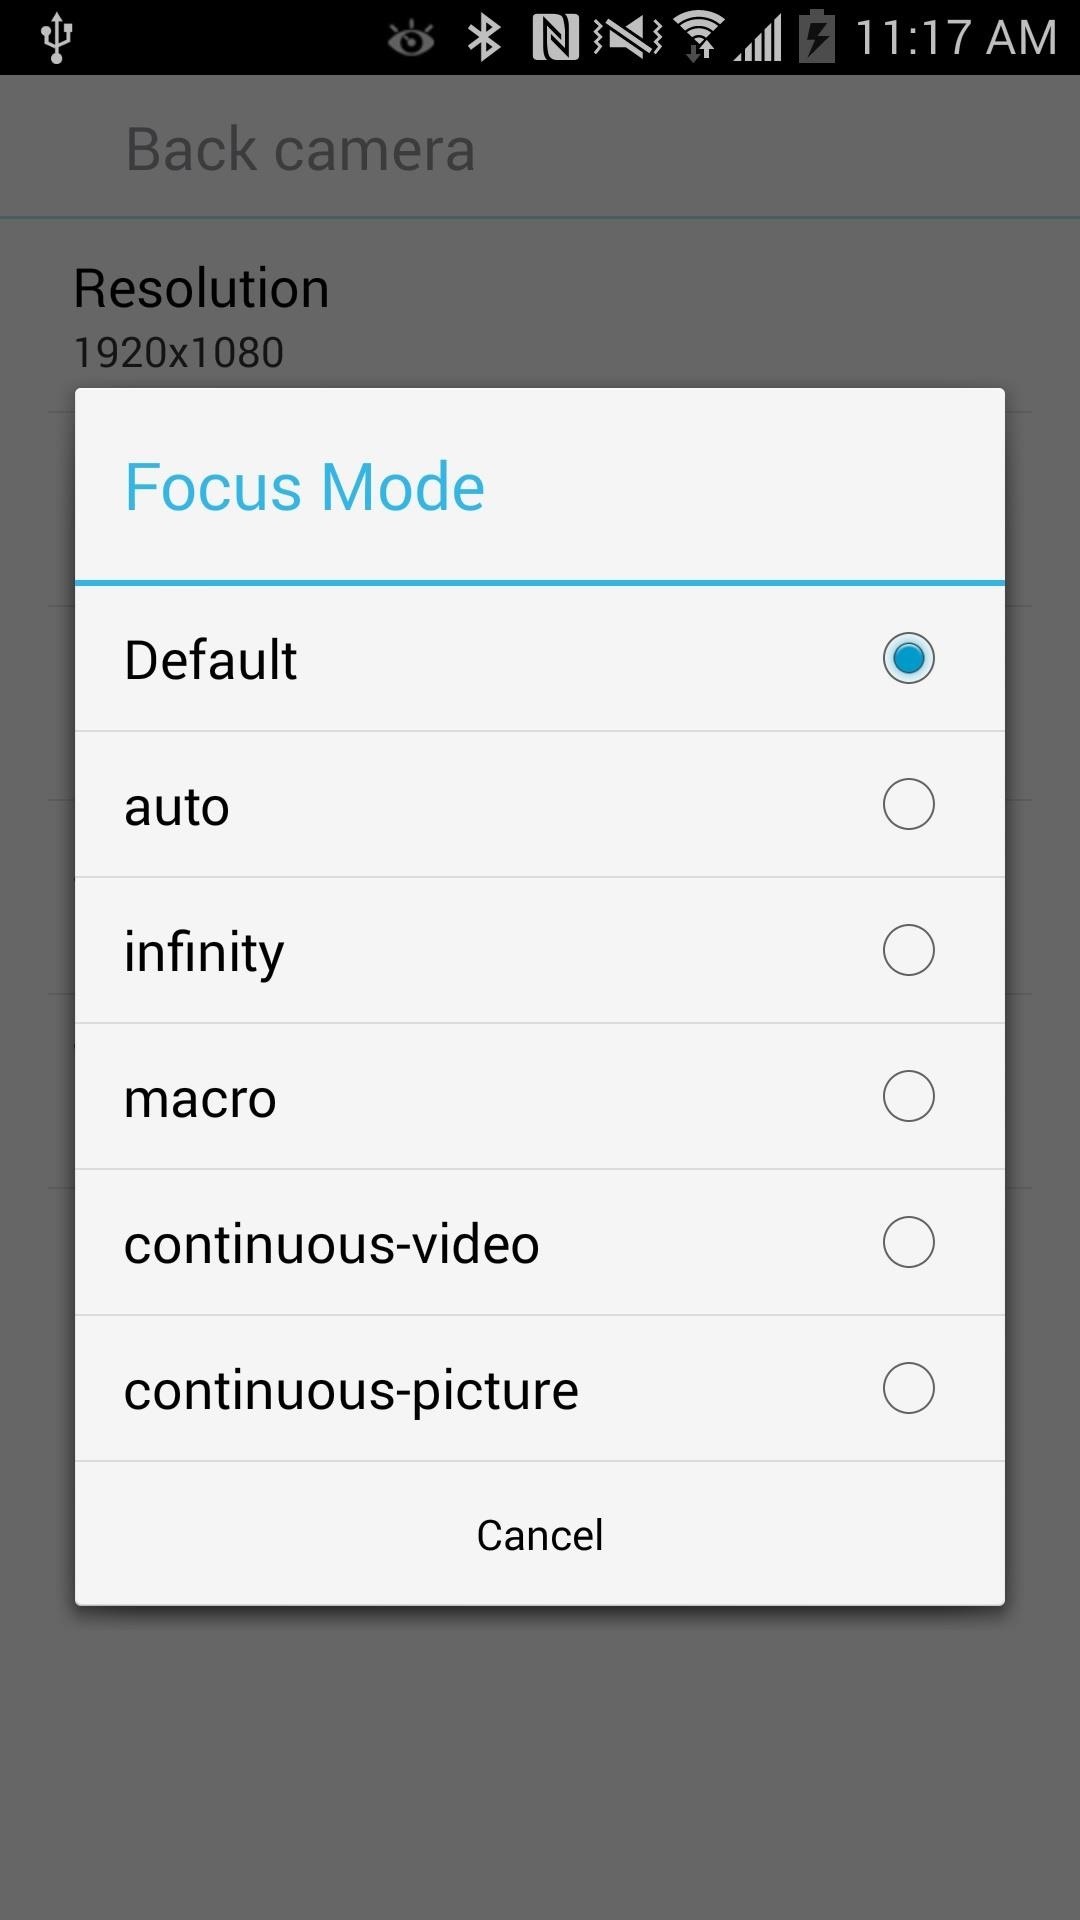 How to Fix & Improve the Buggy Skype App for Android on Your Galaxy Note 3